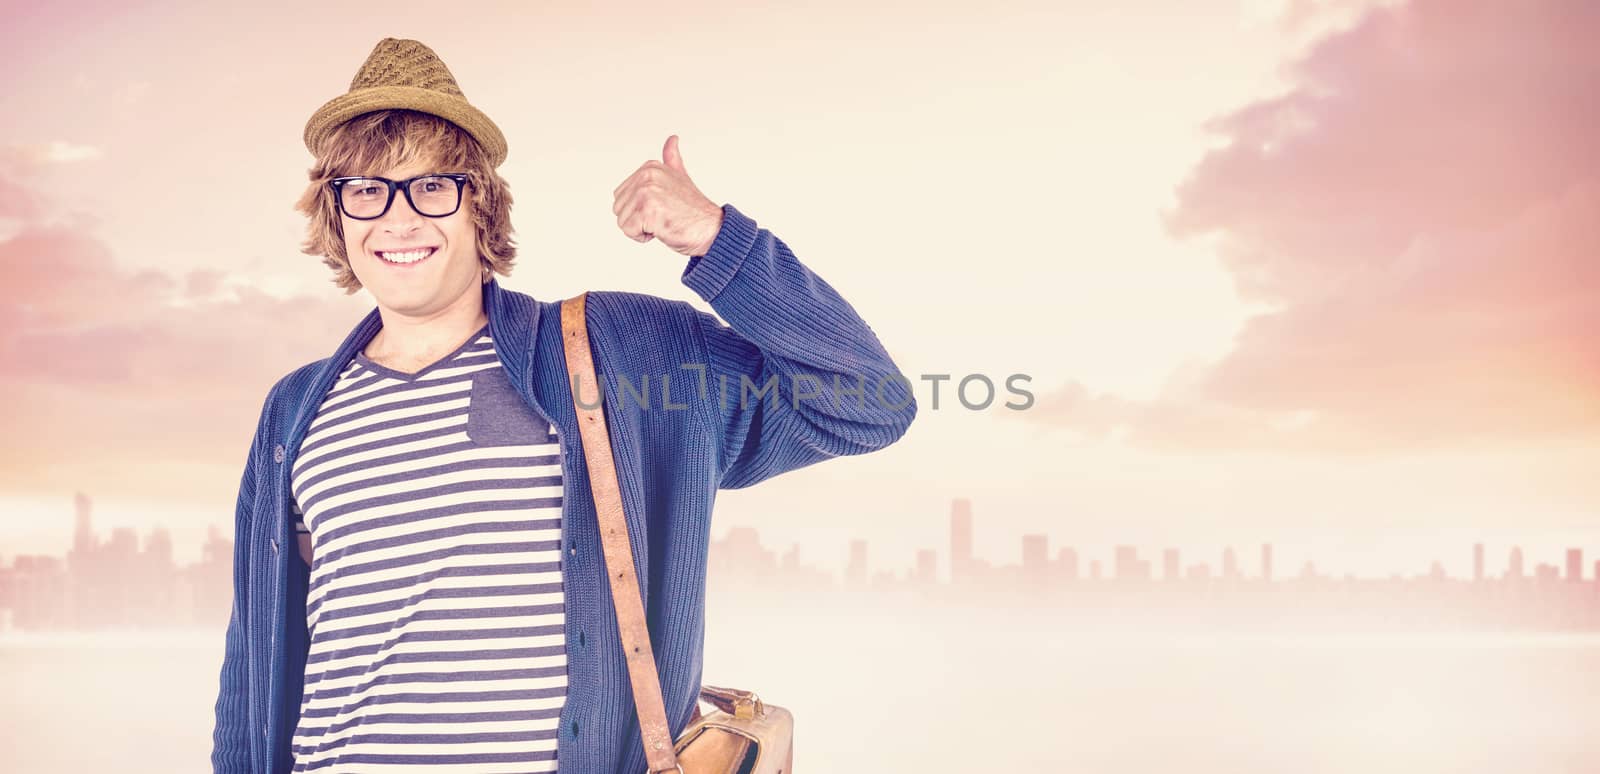 Smiling hipster making thumbs up against cityscape on the horizon